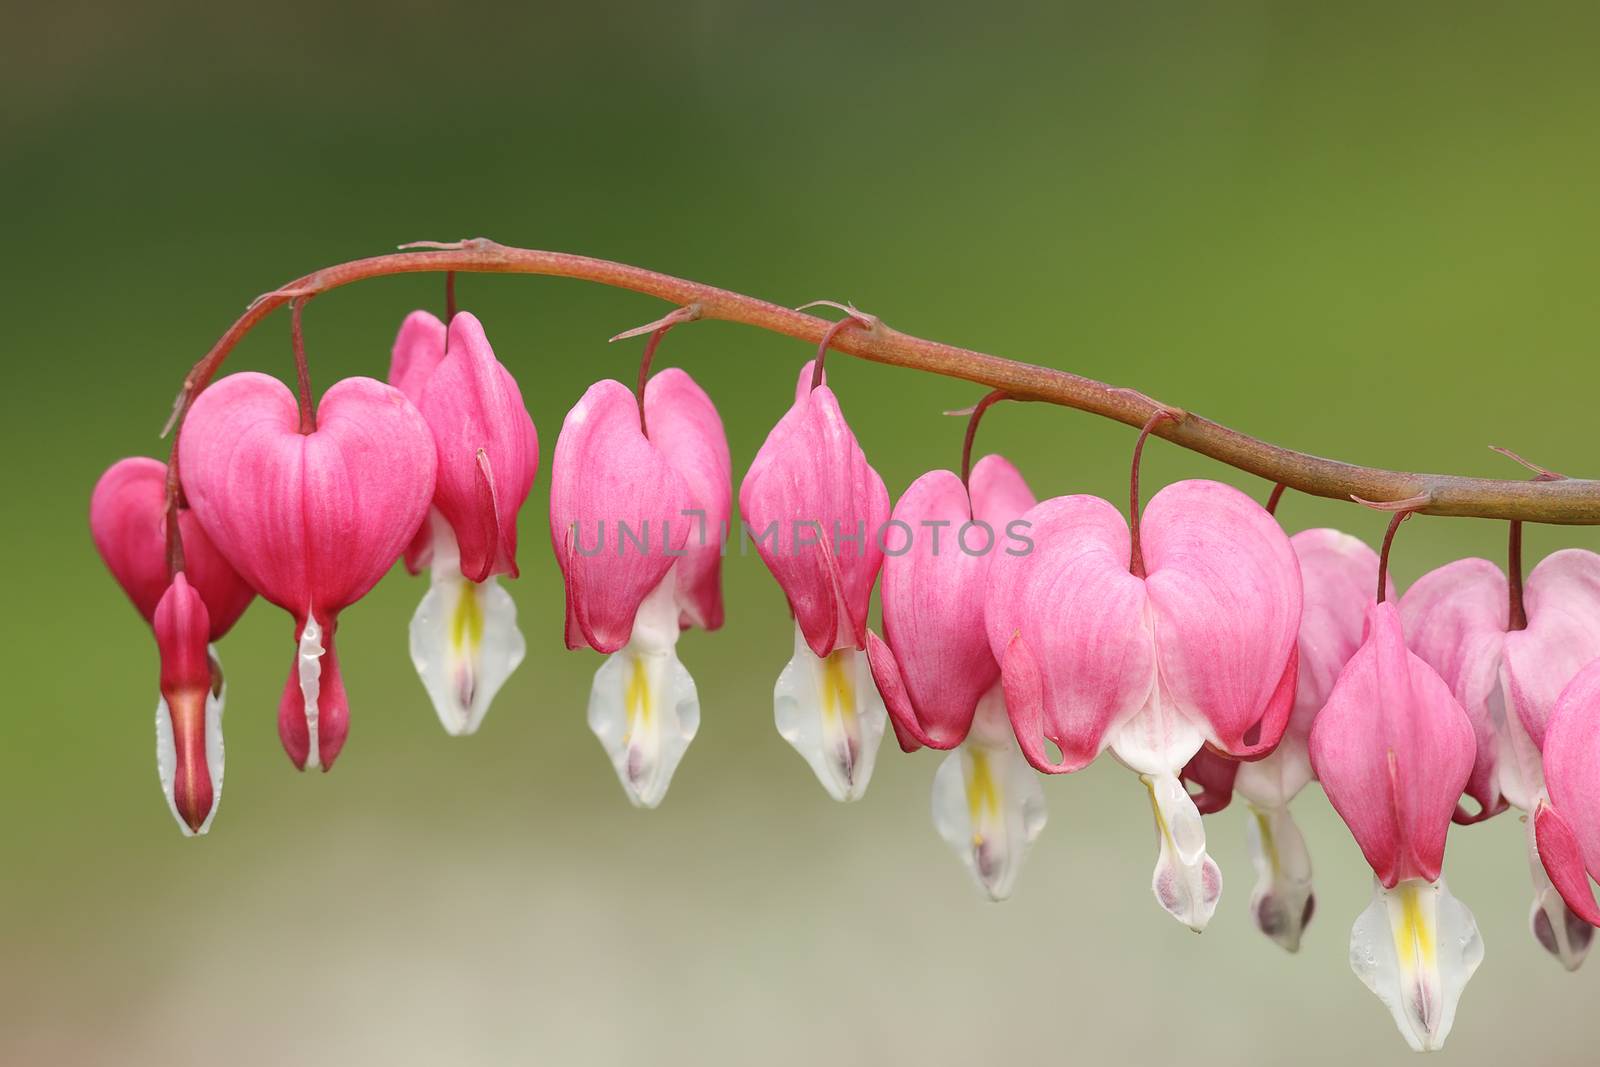 fukuhara bleeding heart flowers over green out of focus background ( Dicentra spectabilis syn. Lamprocapnos spectabilis )